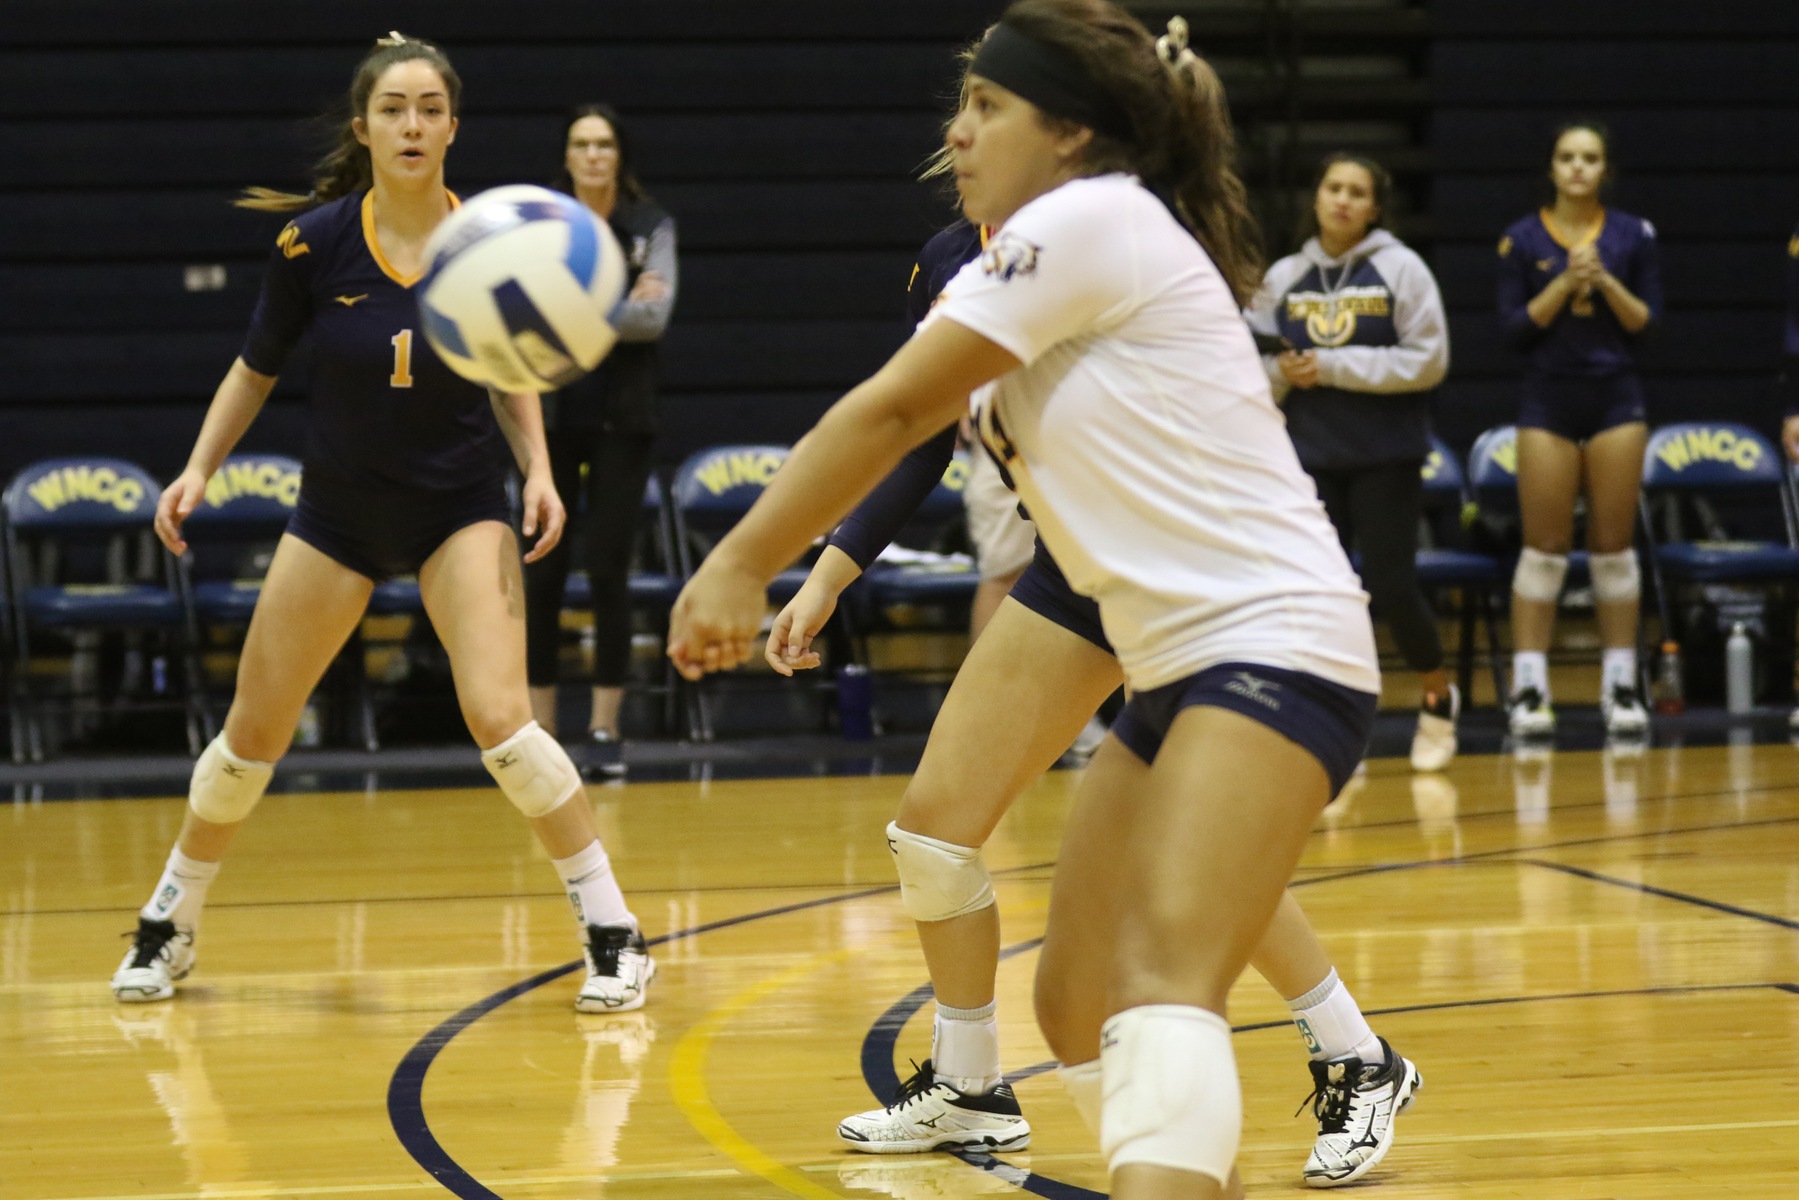 WNCC volleyball team sweeps Otero